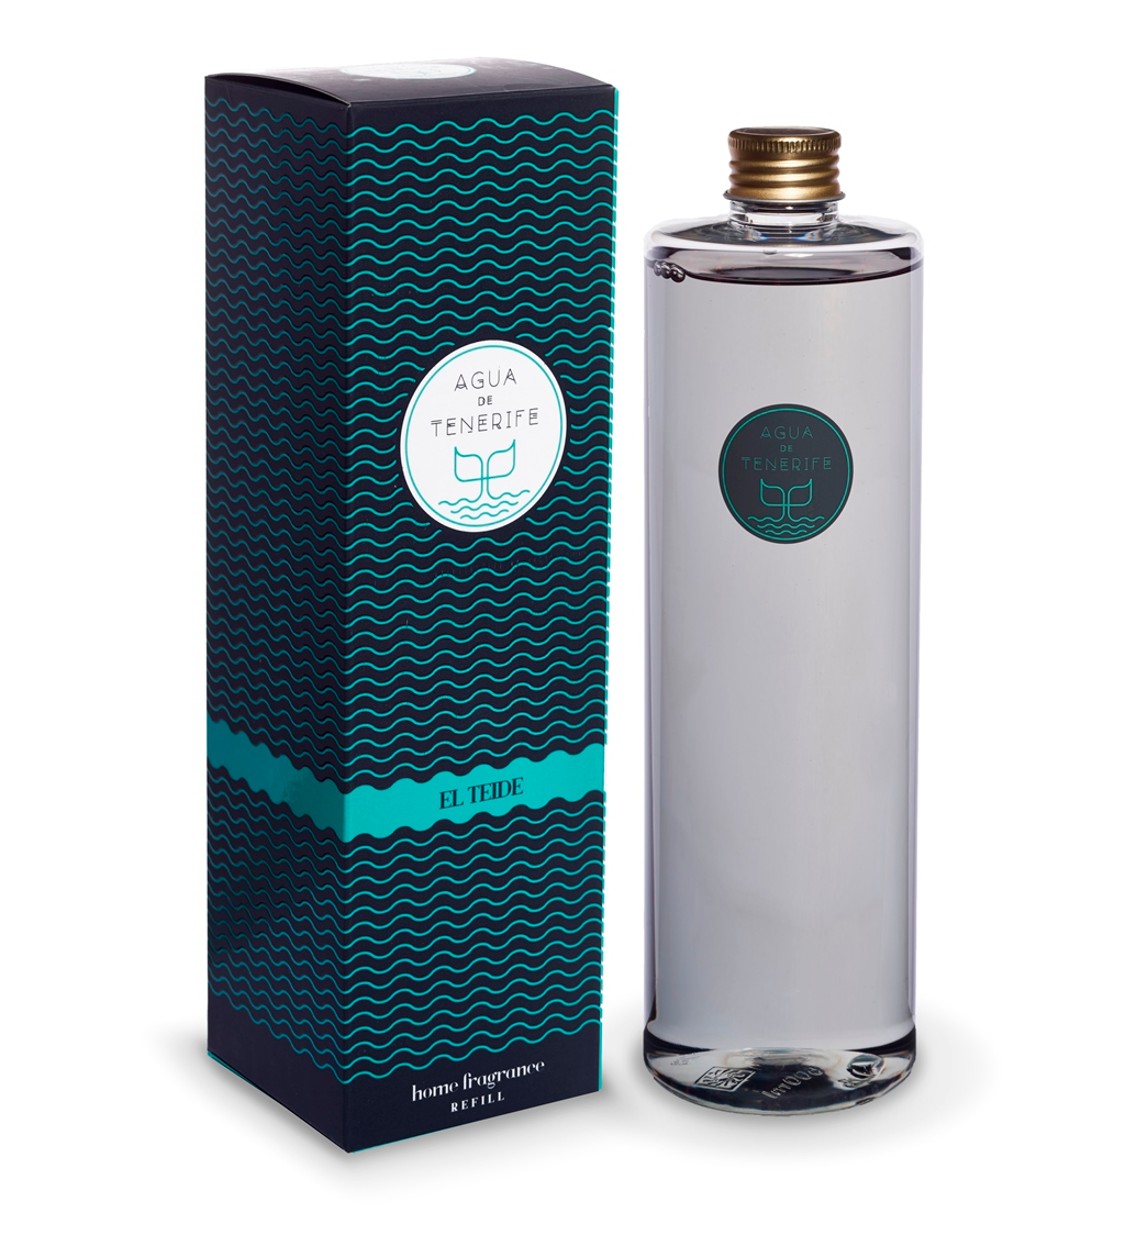 shop Agua de Tenerife  EL TEIDE: El Teide Air Freshner Refill 500 ml.
The fragrance is inspired by the dominant volcano on the island, wrapped in a cocoon of essences ideal for people who love refi ned and harmony filled environments. number 33